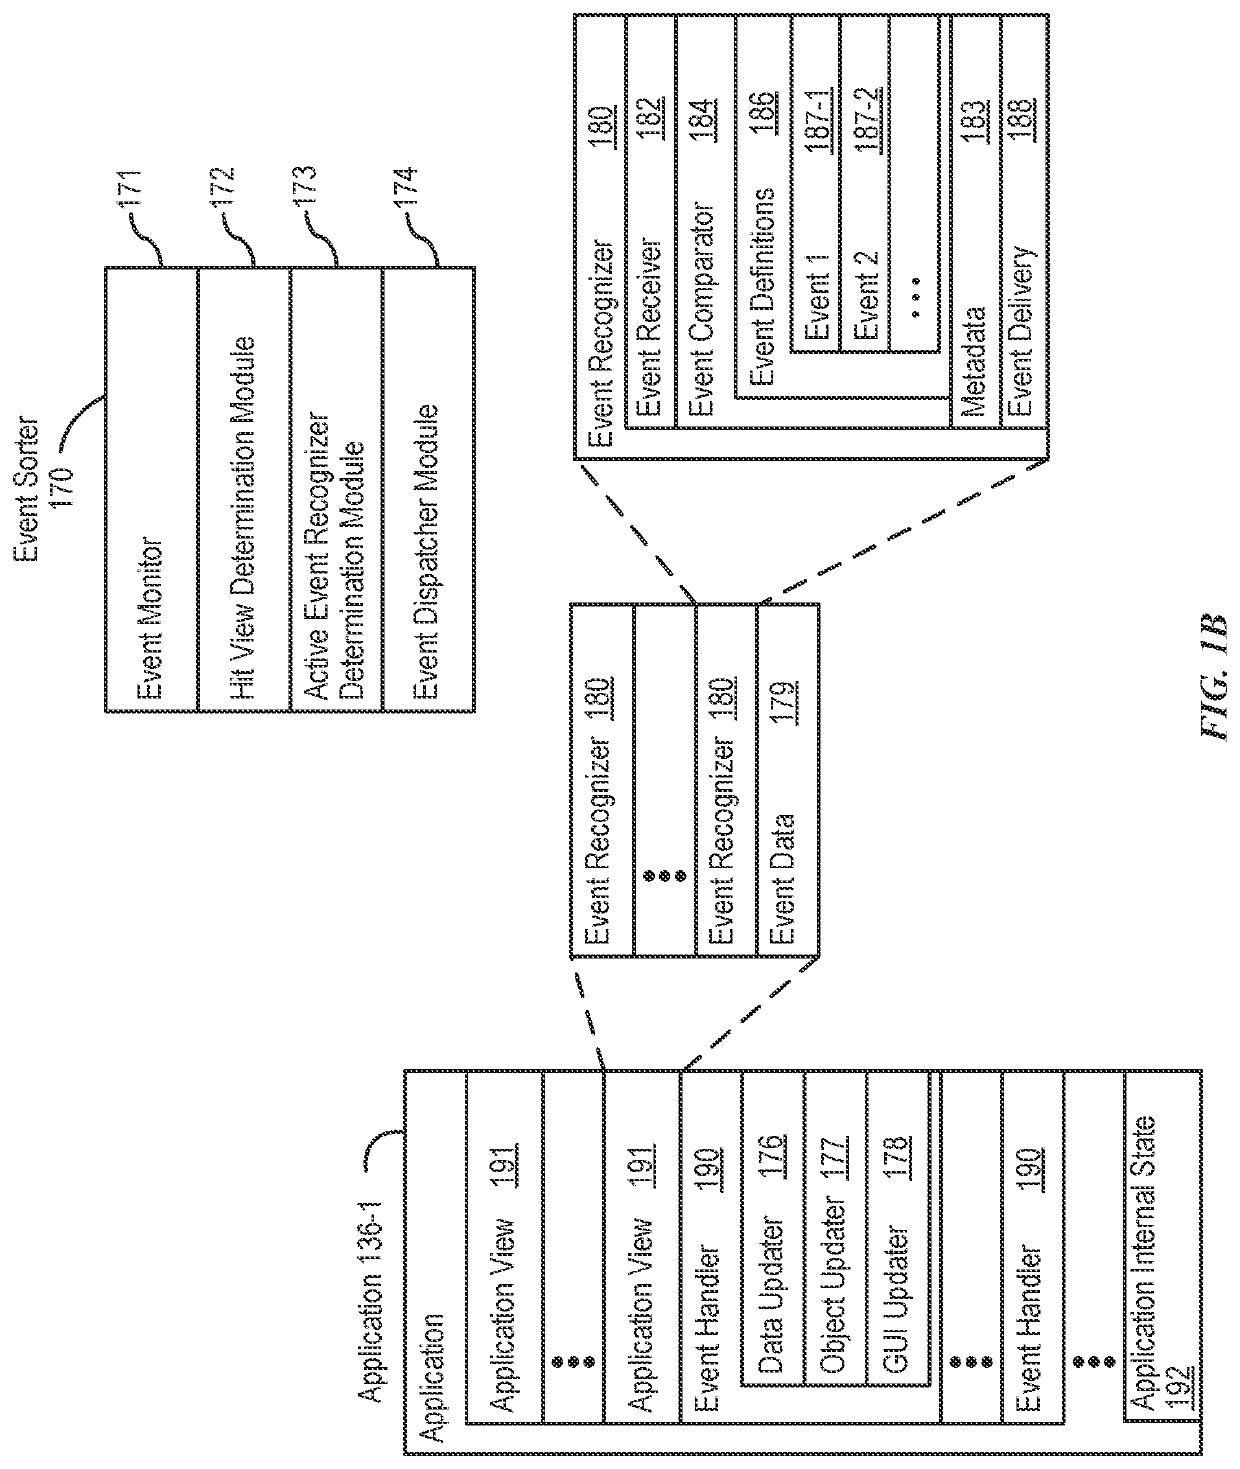 Methods and interfaces for adjusting the volume of media